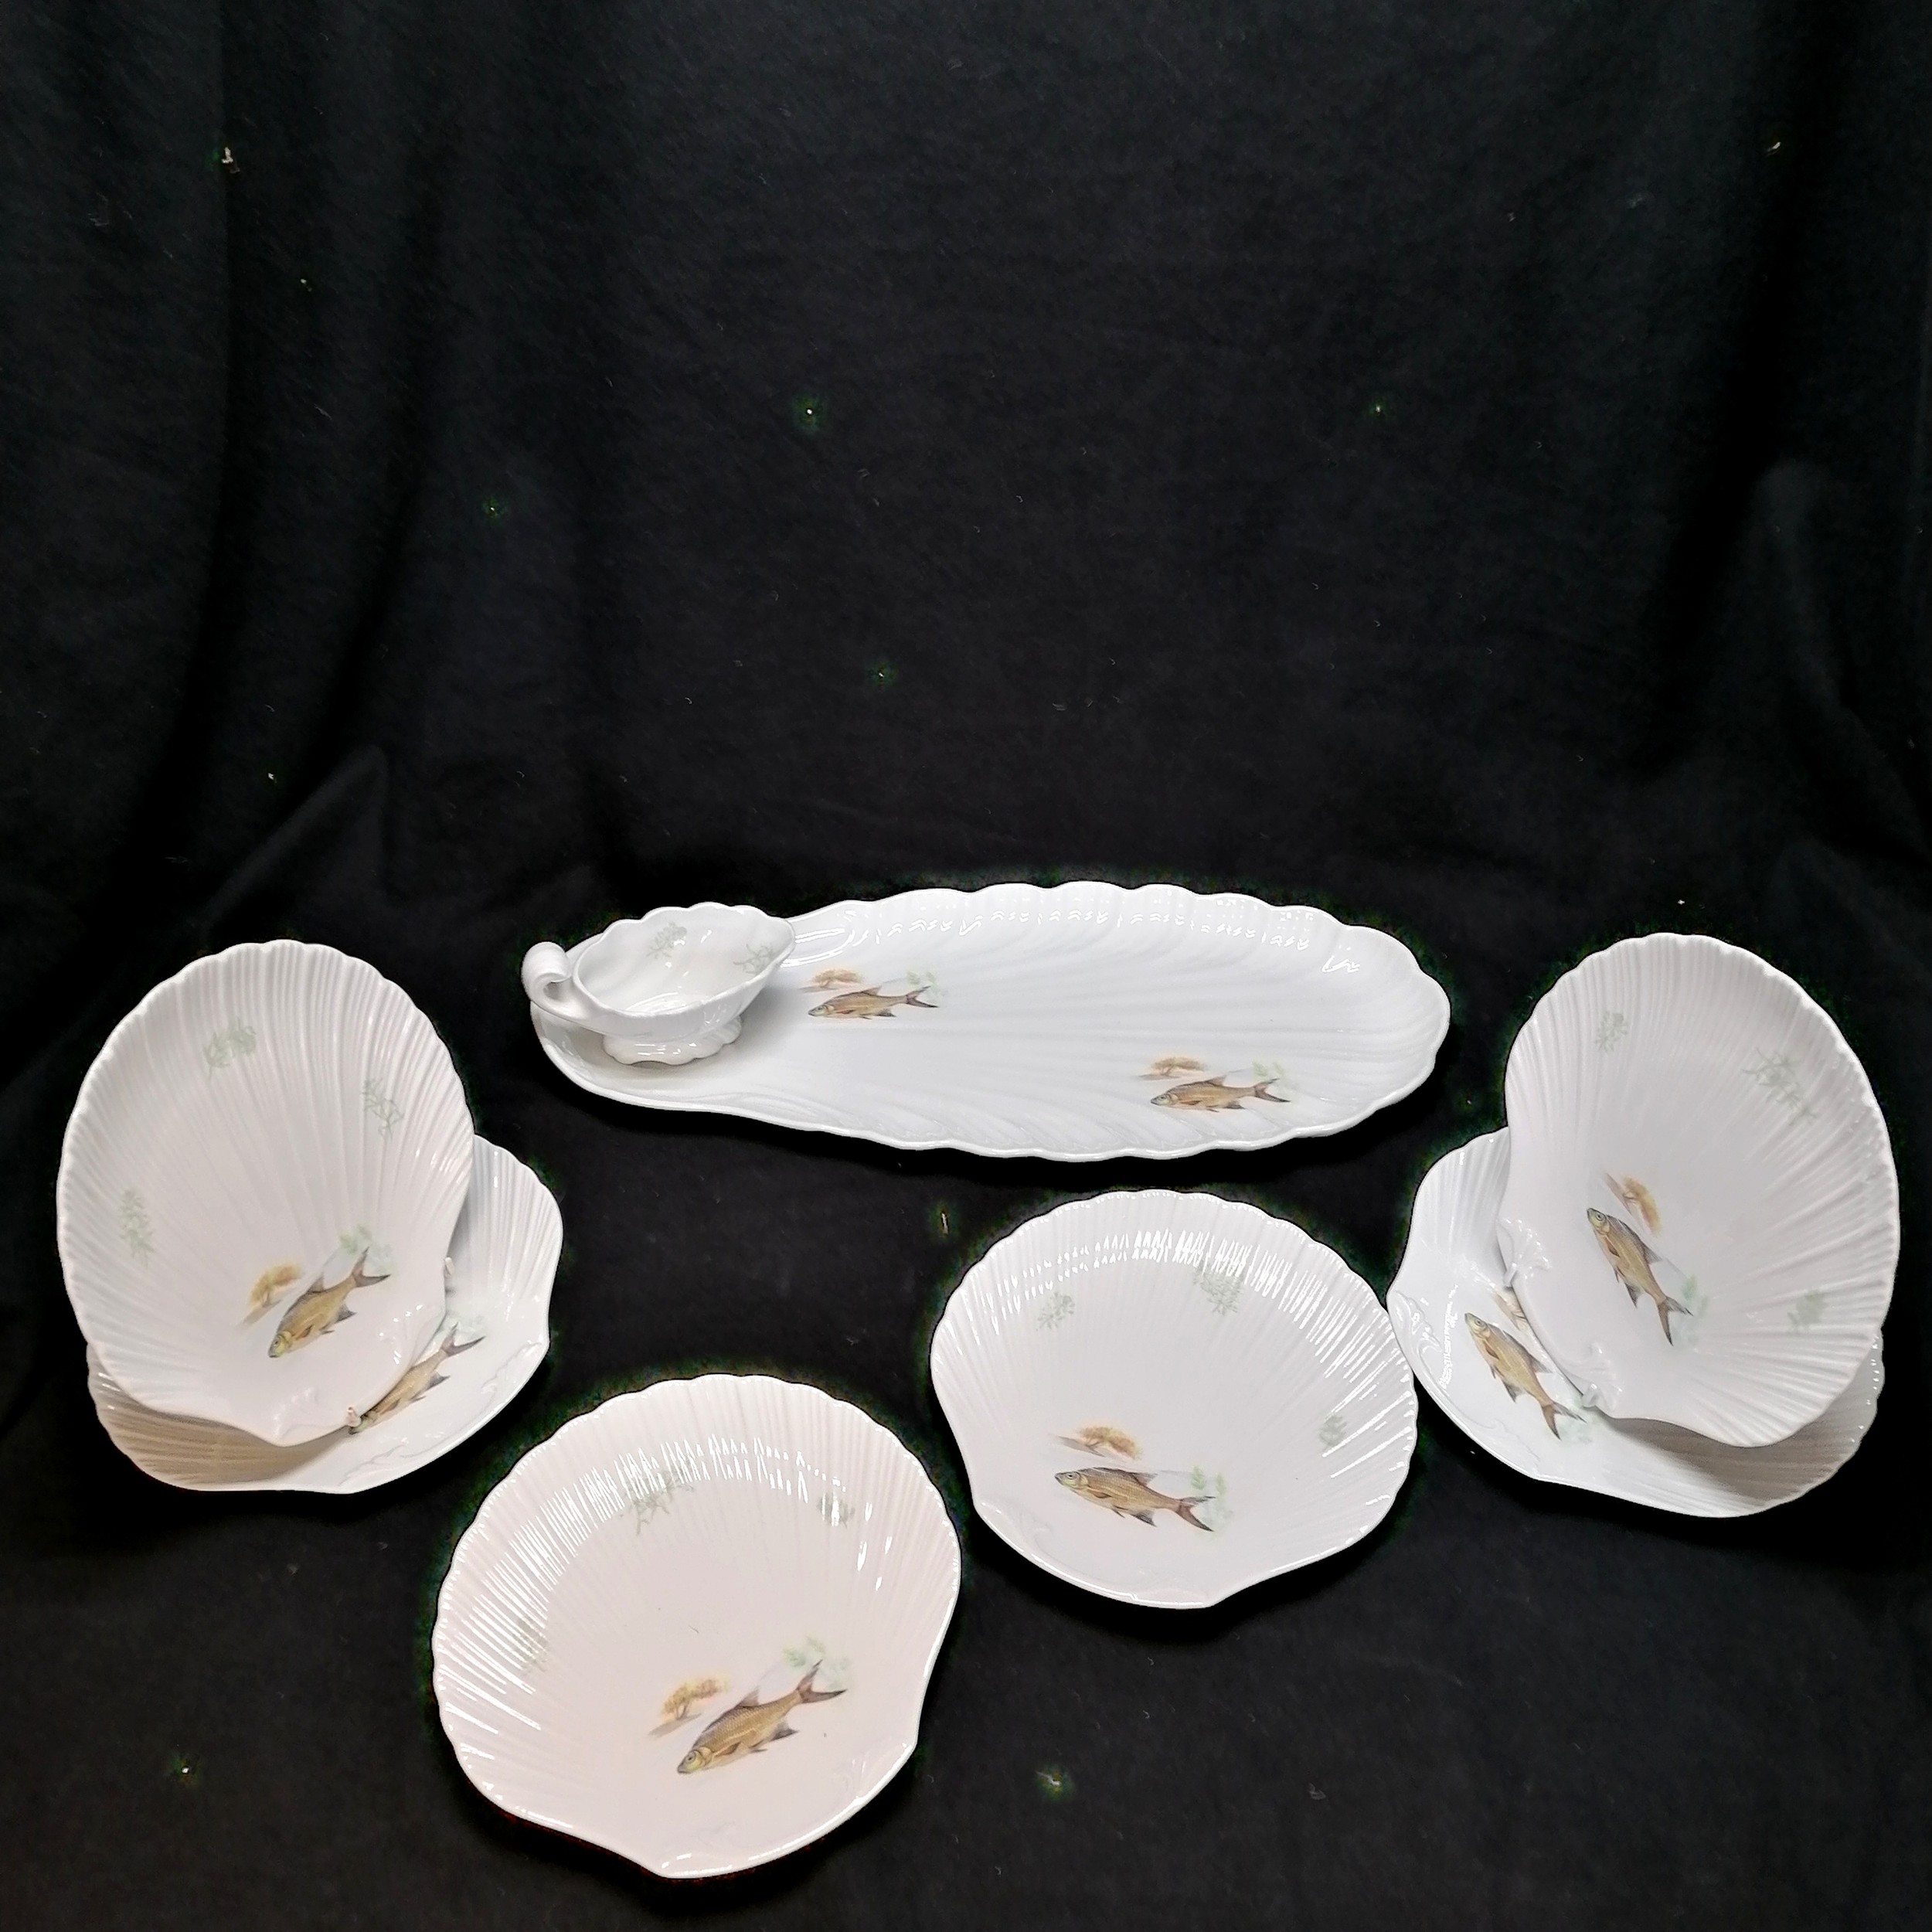 Continental salmon serving platter (56cm x 24cm) t/w 6 shell shaped matching plates & a sauceboat